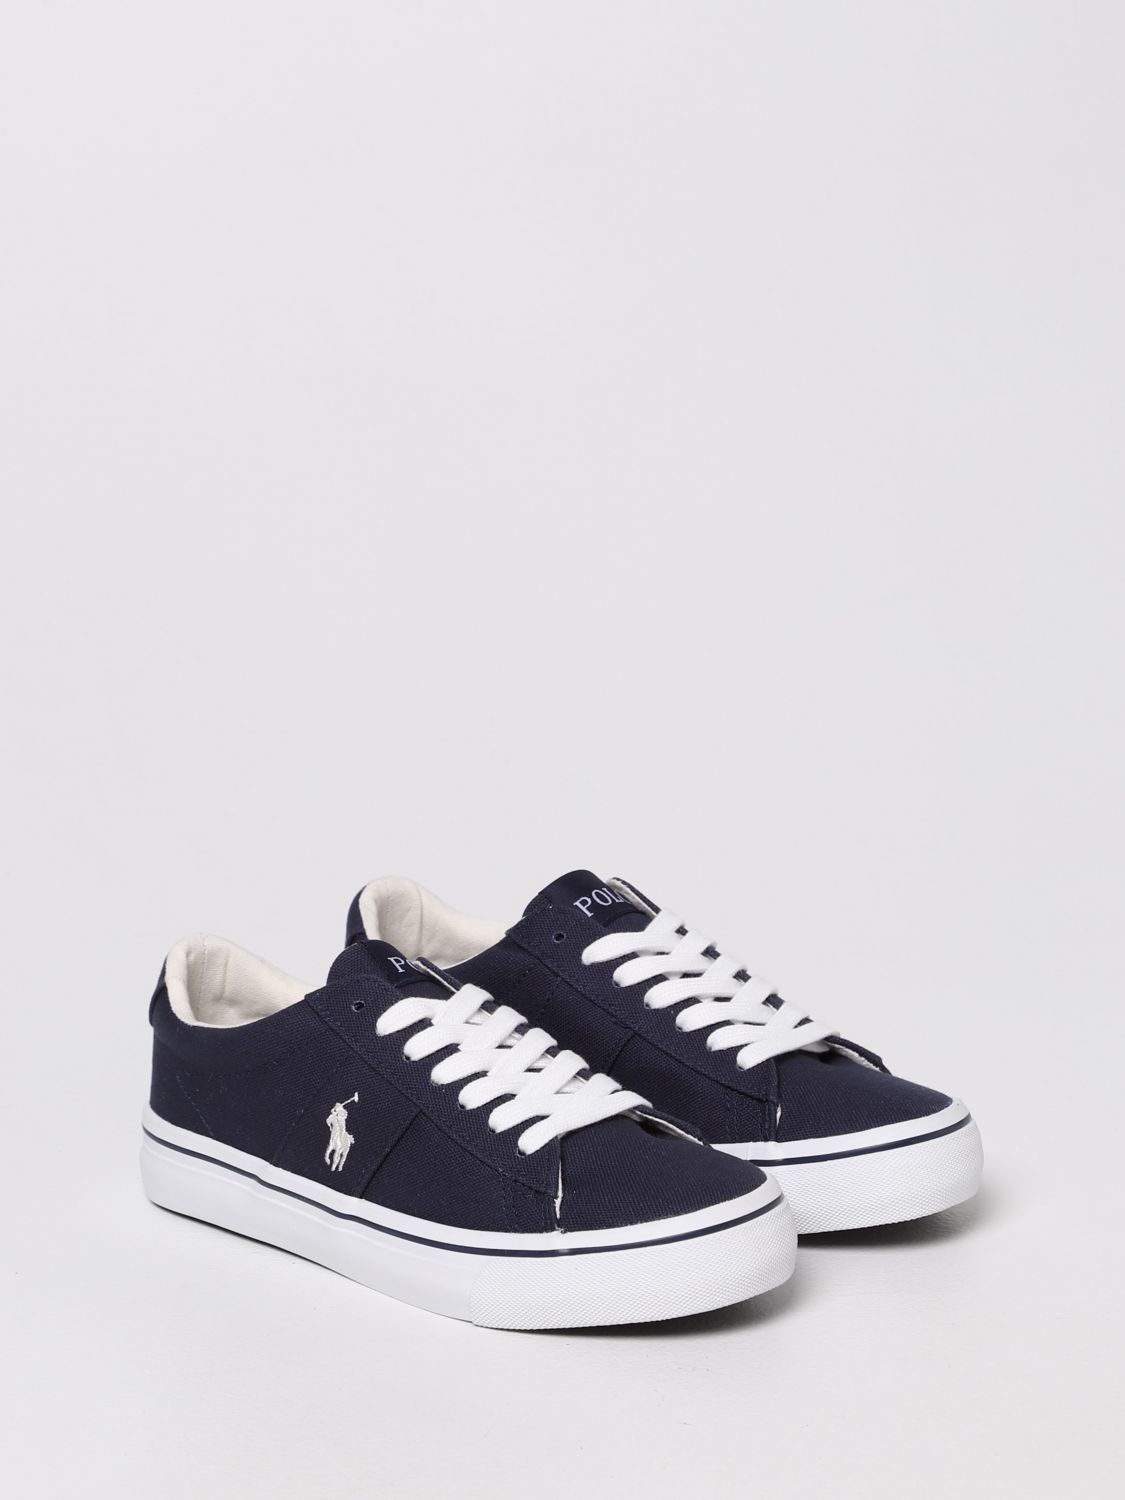 Polo Ralph Lauren Outlet: Sayer canvas sneakers - Navy | Polo Ralph Lauren  shoes RF103396 online on 